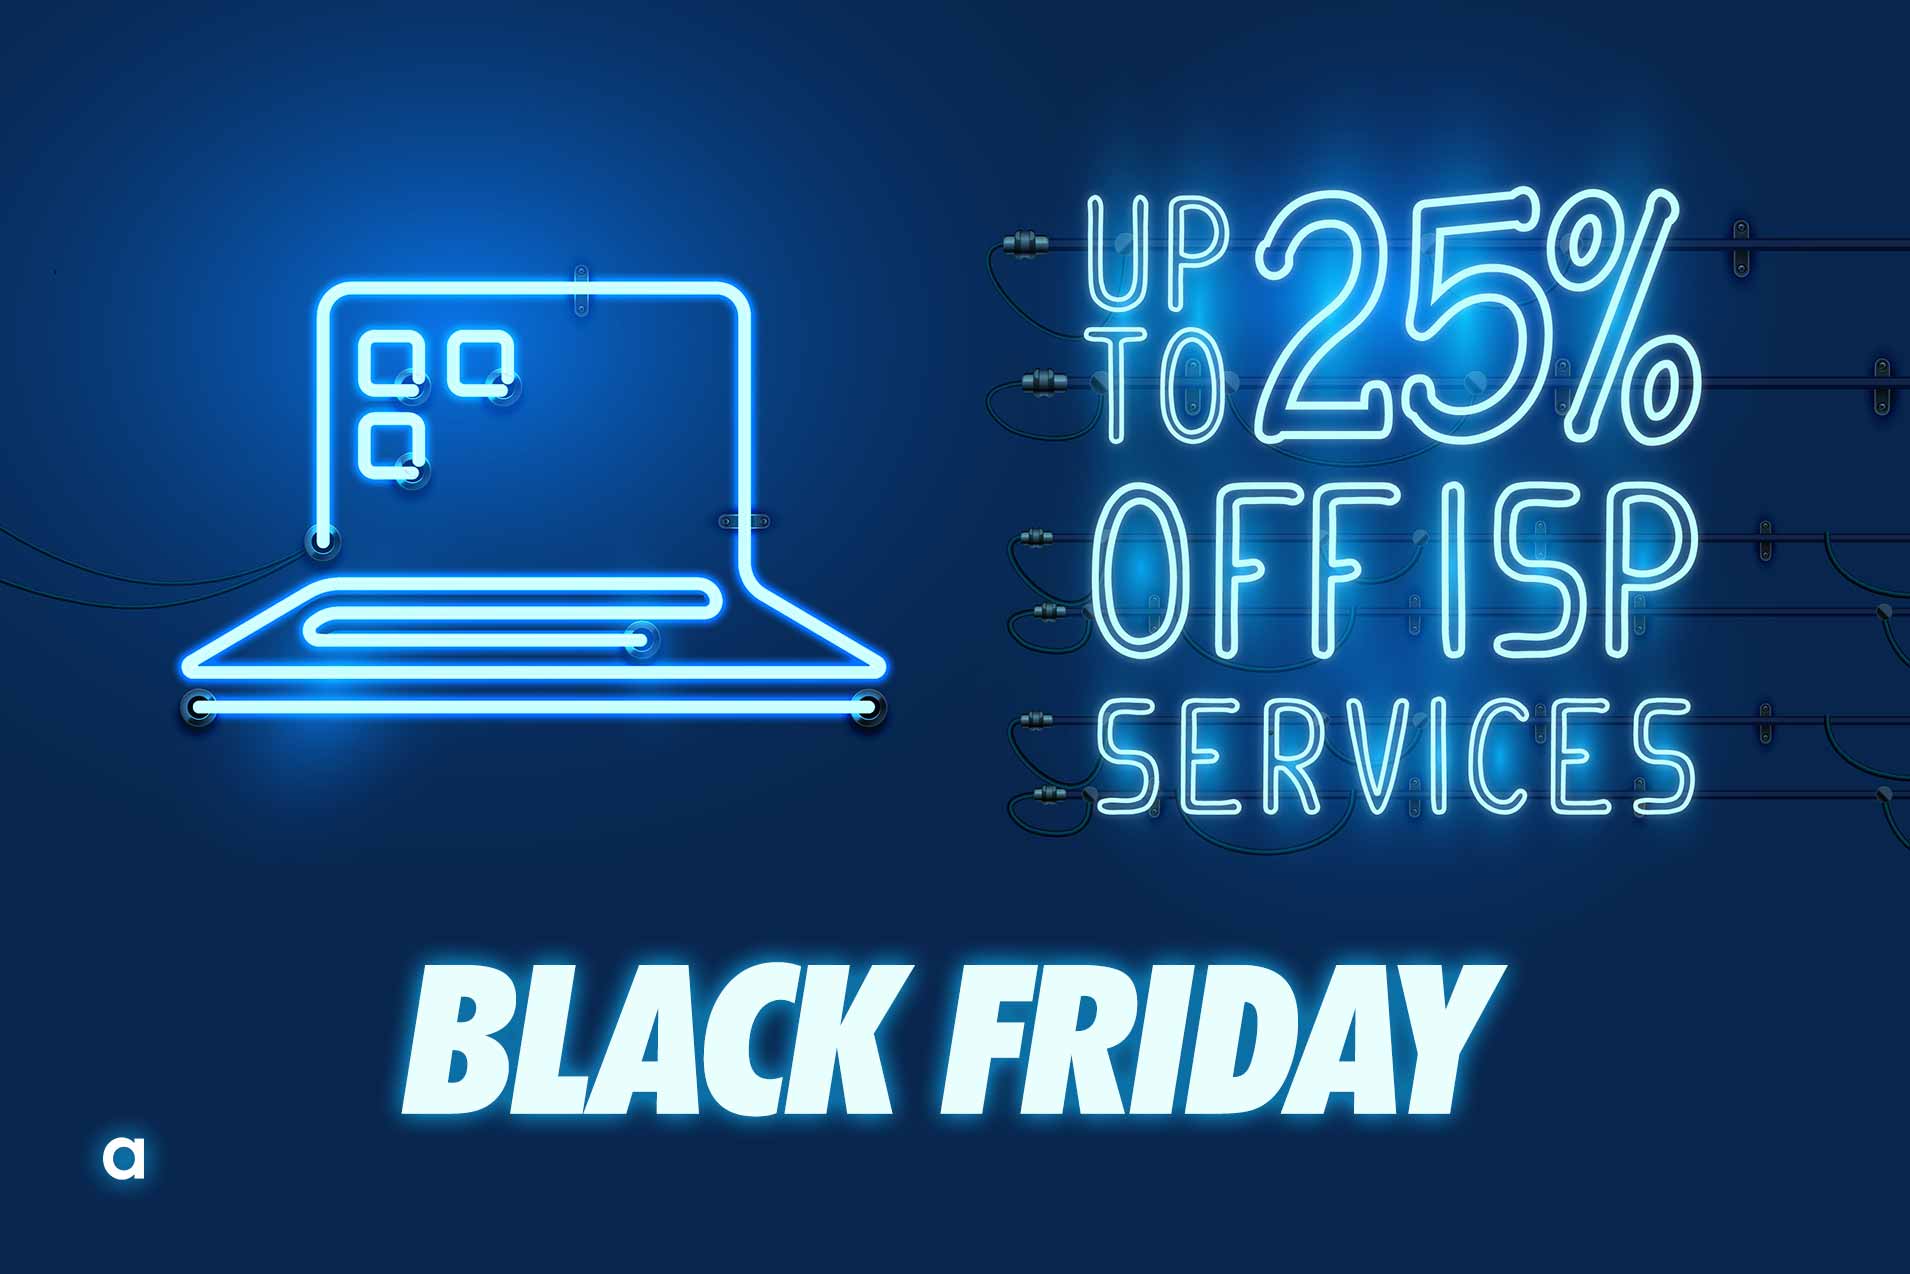 Excusive Black Friday Offer from Academia – up to 25% off your Broadband Services